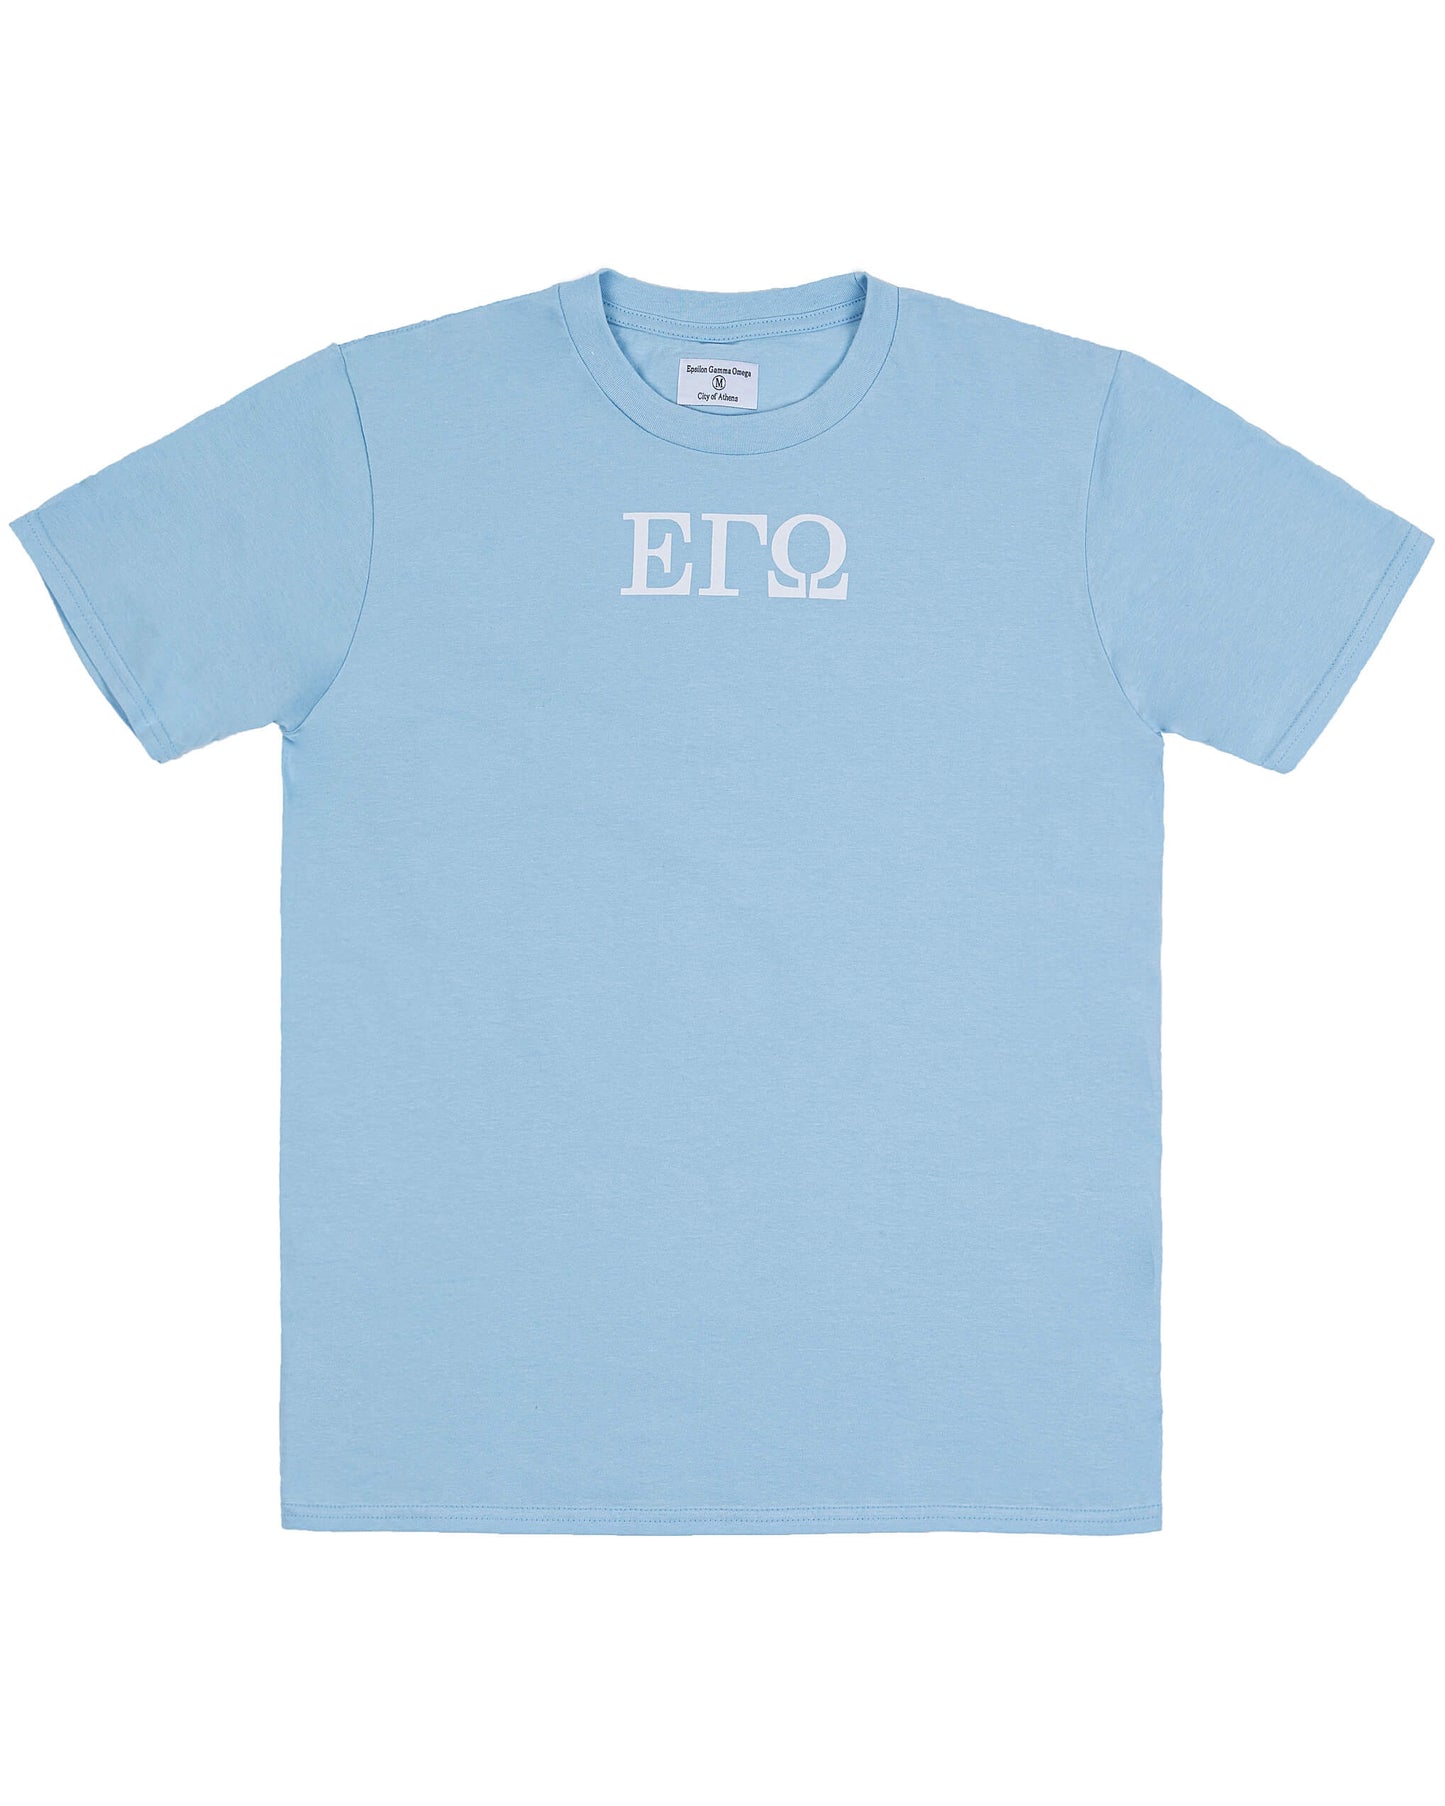 The baby blue t-shirt